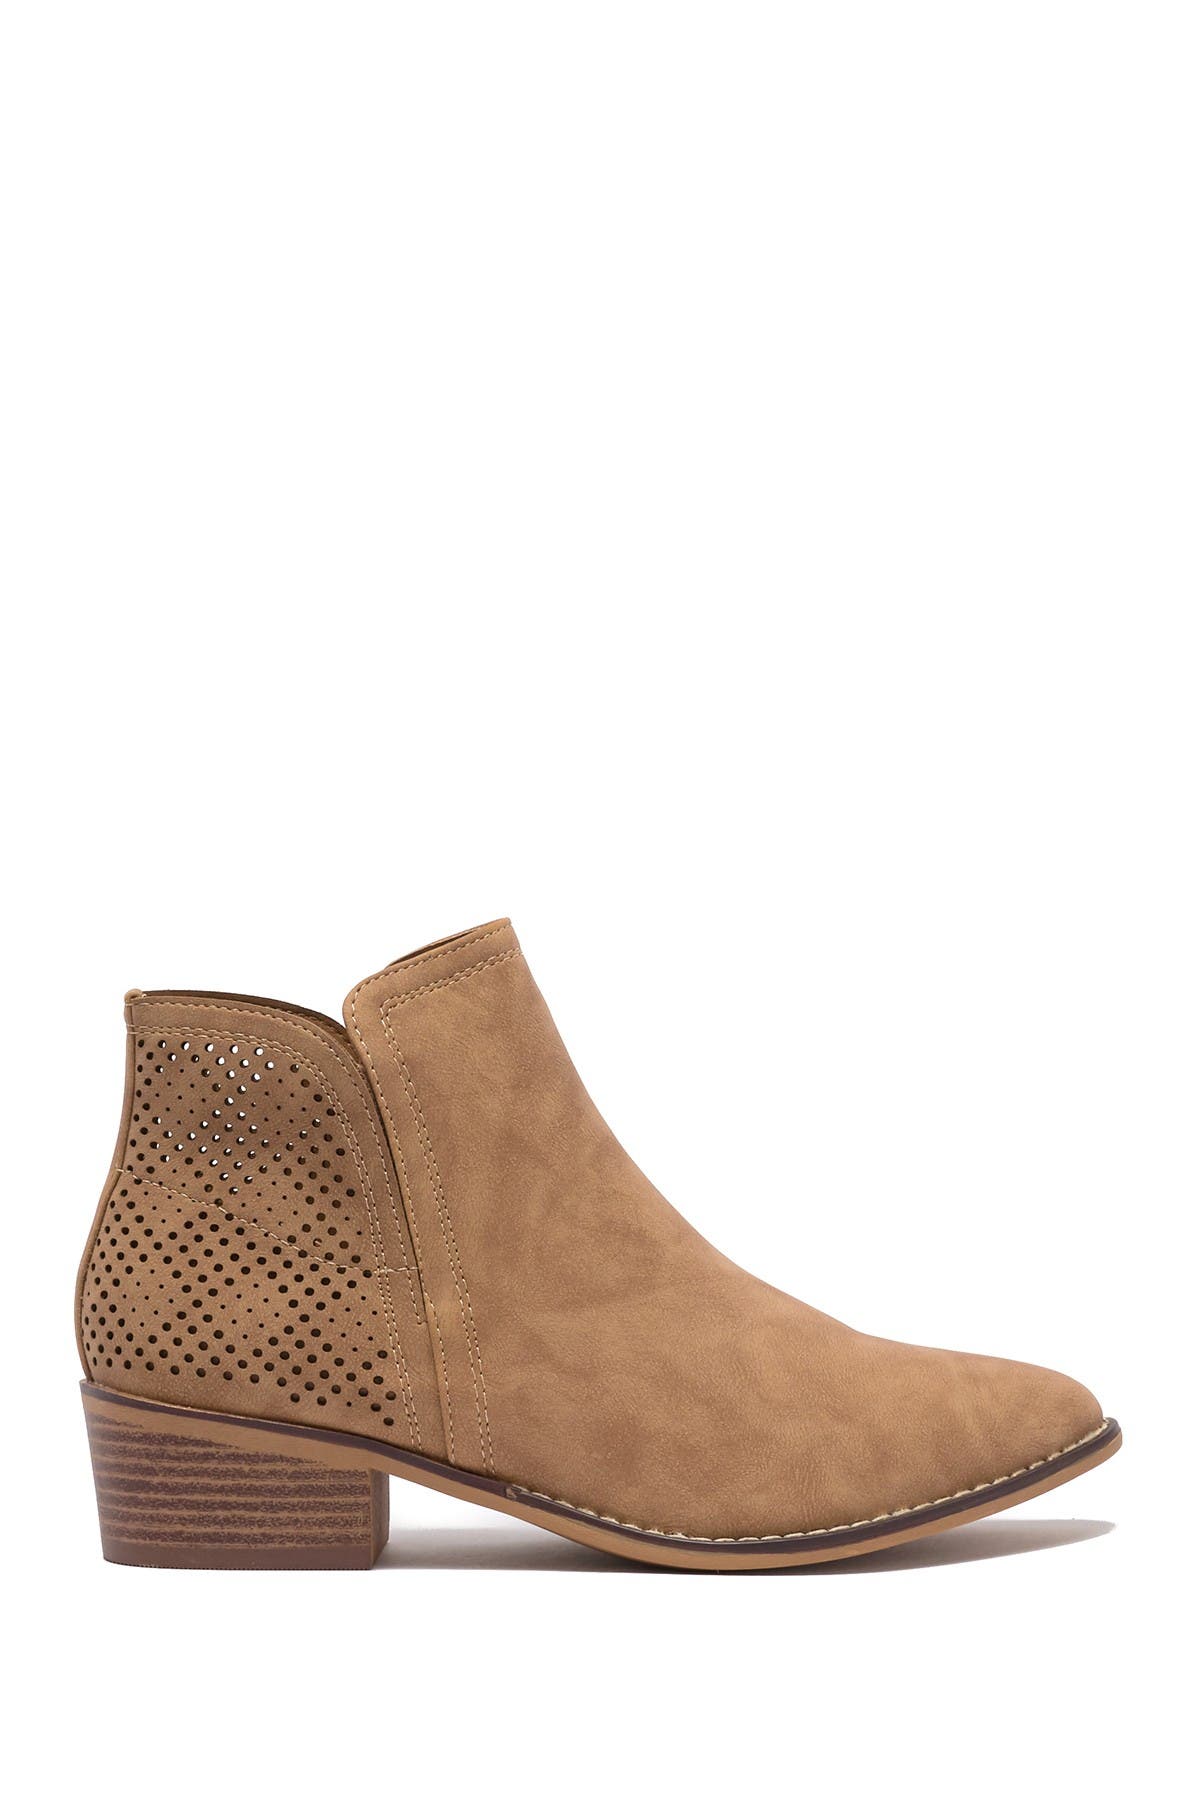 madden girl perforated booties